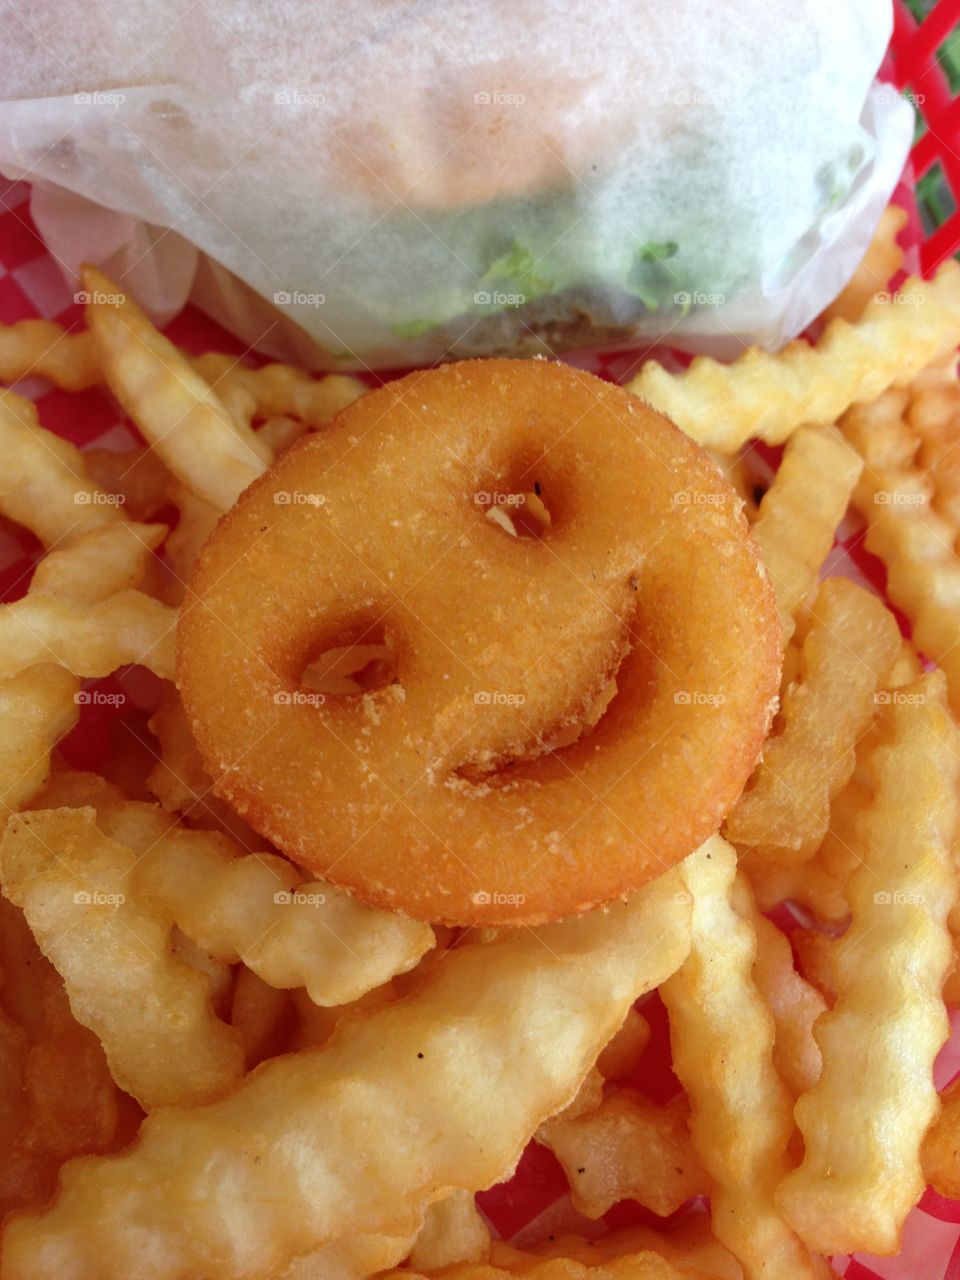 A Happy Onion. A smiling onion ring at The Snowcap Drive-in in Seligman, AZ on Route 66